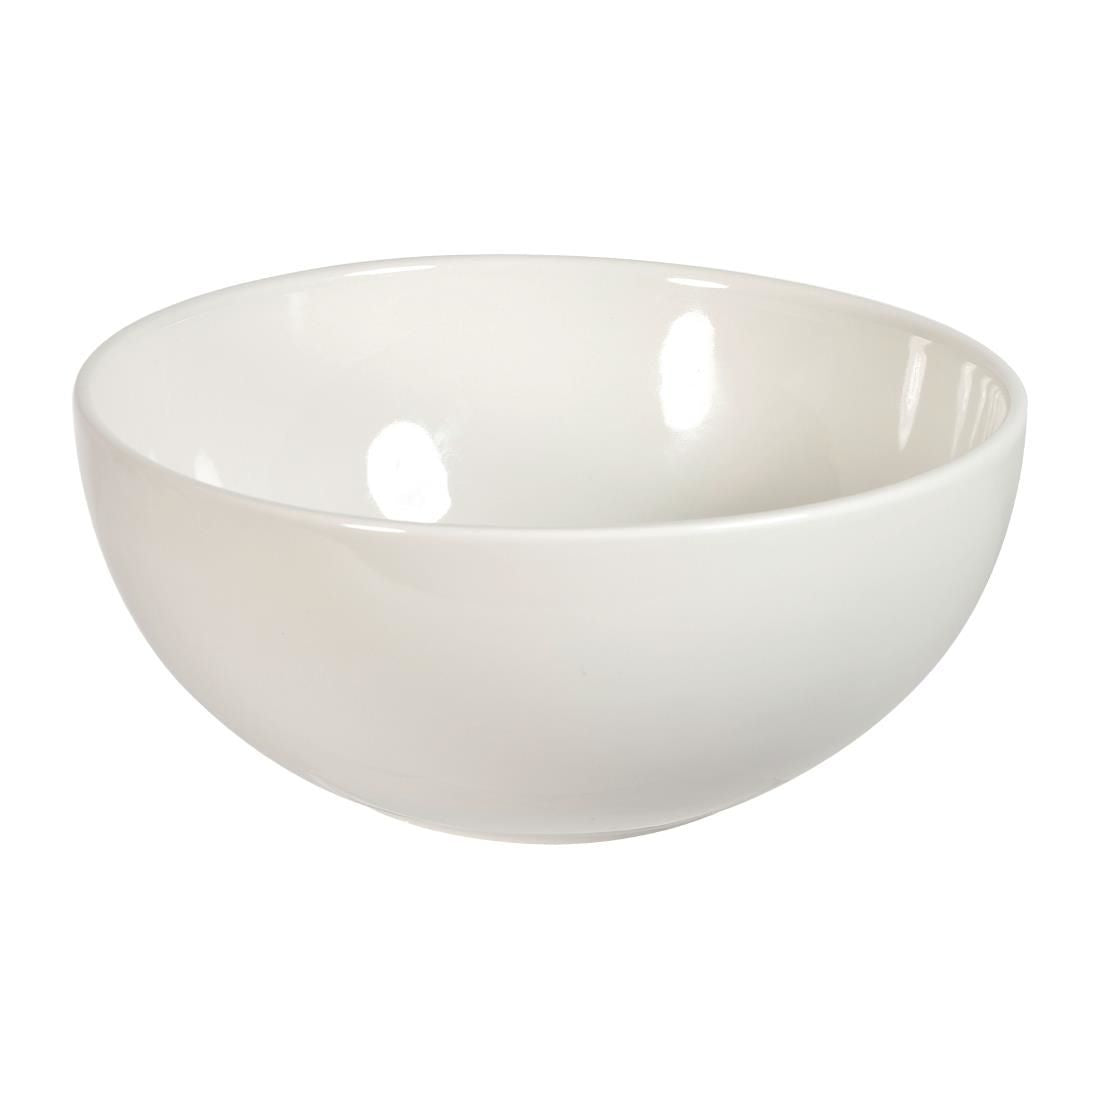 FA698 Churchill Profile Noodle Bowls White 37.8oz 183mm (Pack of 6) JD Catering Equipment Solutions Ltd